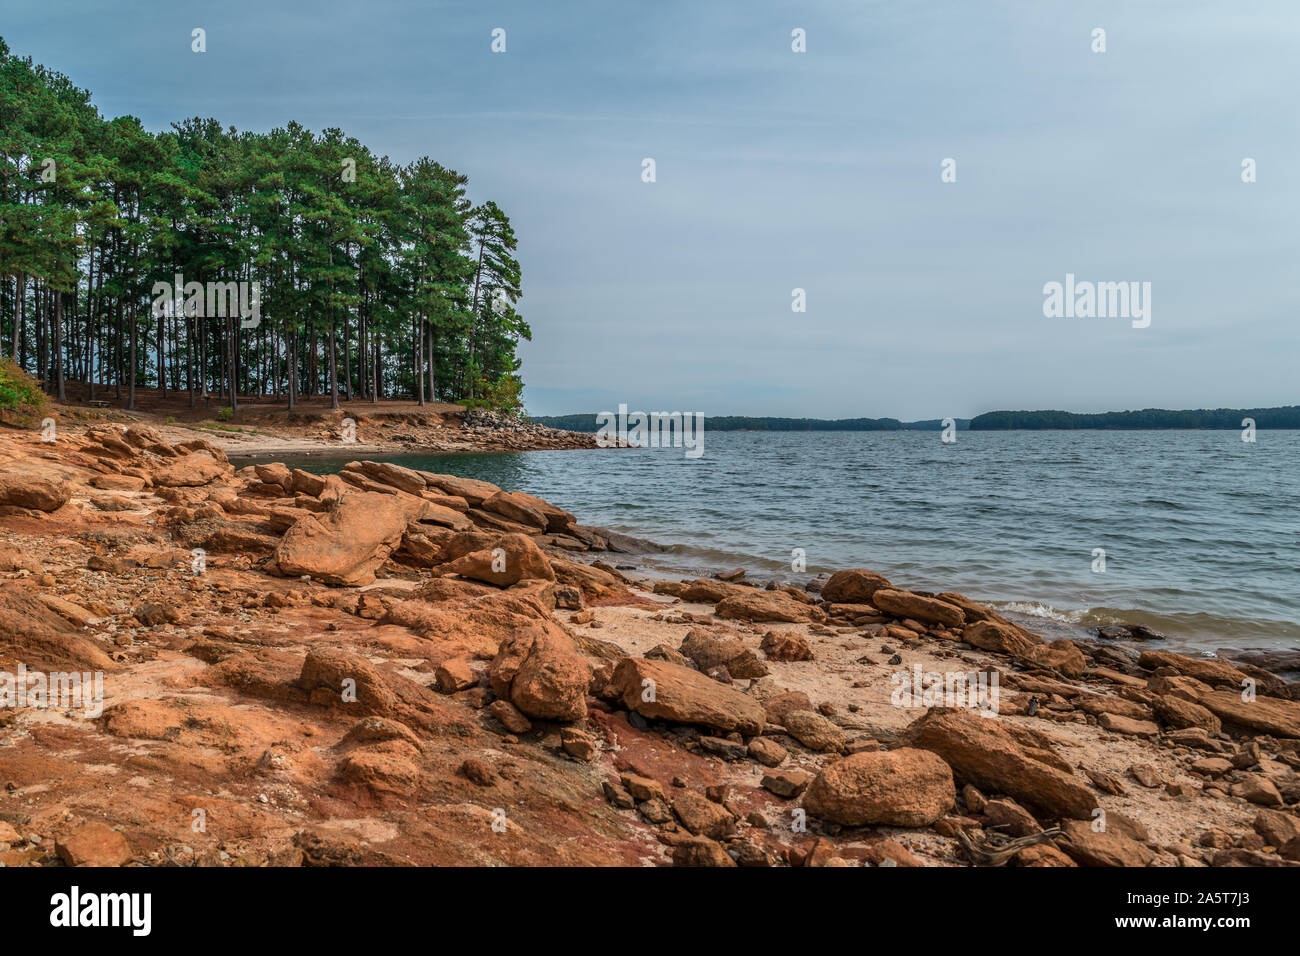 Severe drought conditions at Lake Lanier, Georgia eroding the shoreline exposing the rocks and boulders on a sunny day in fall Stock Photo